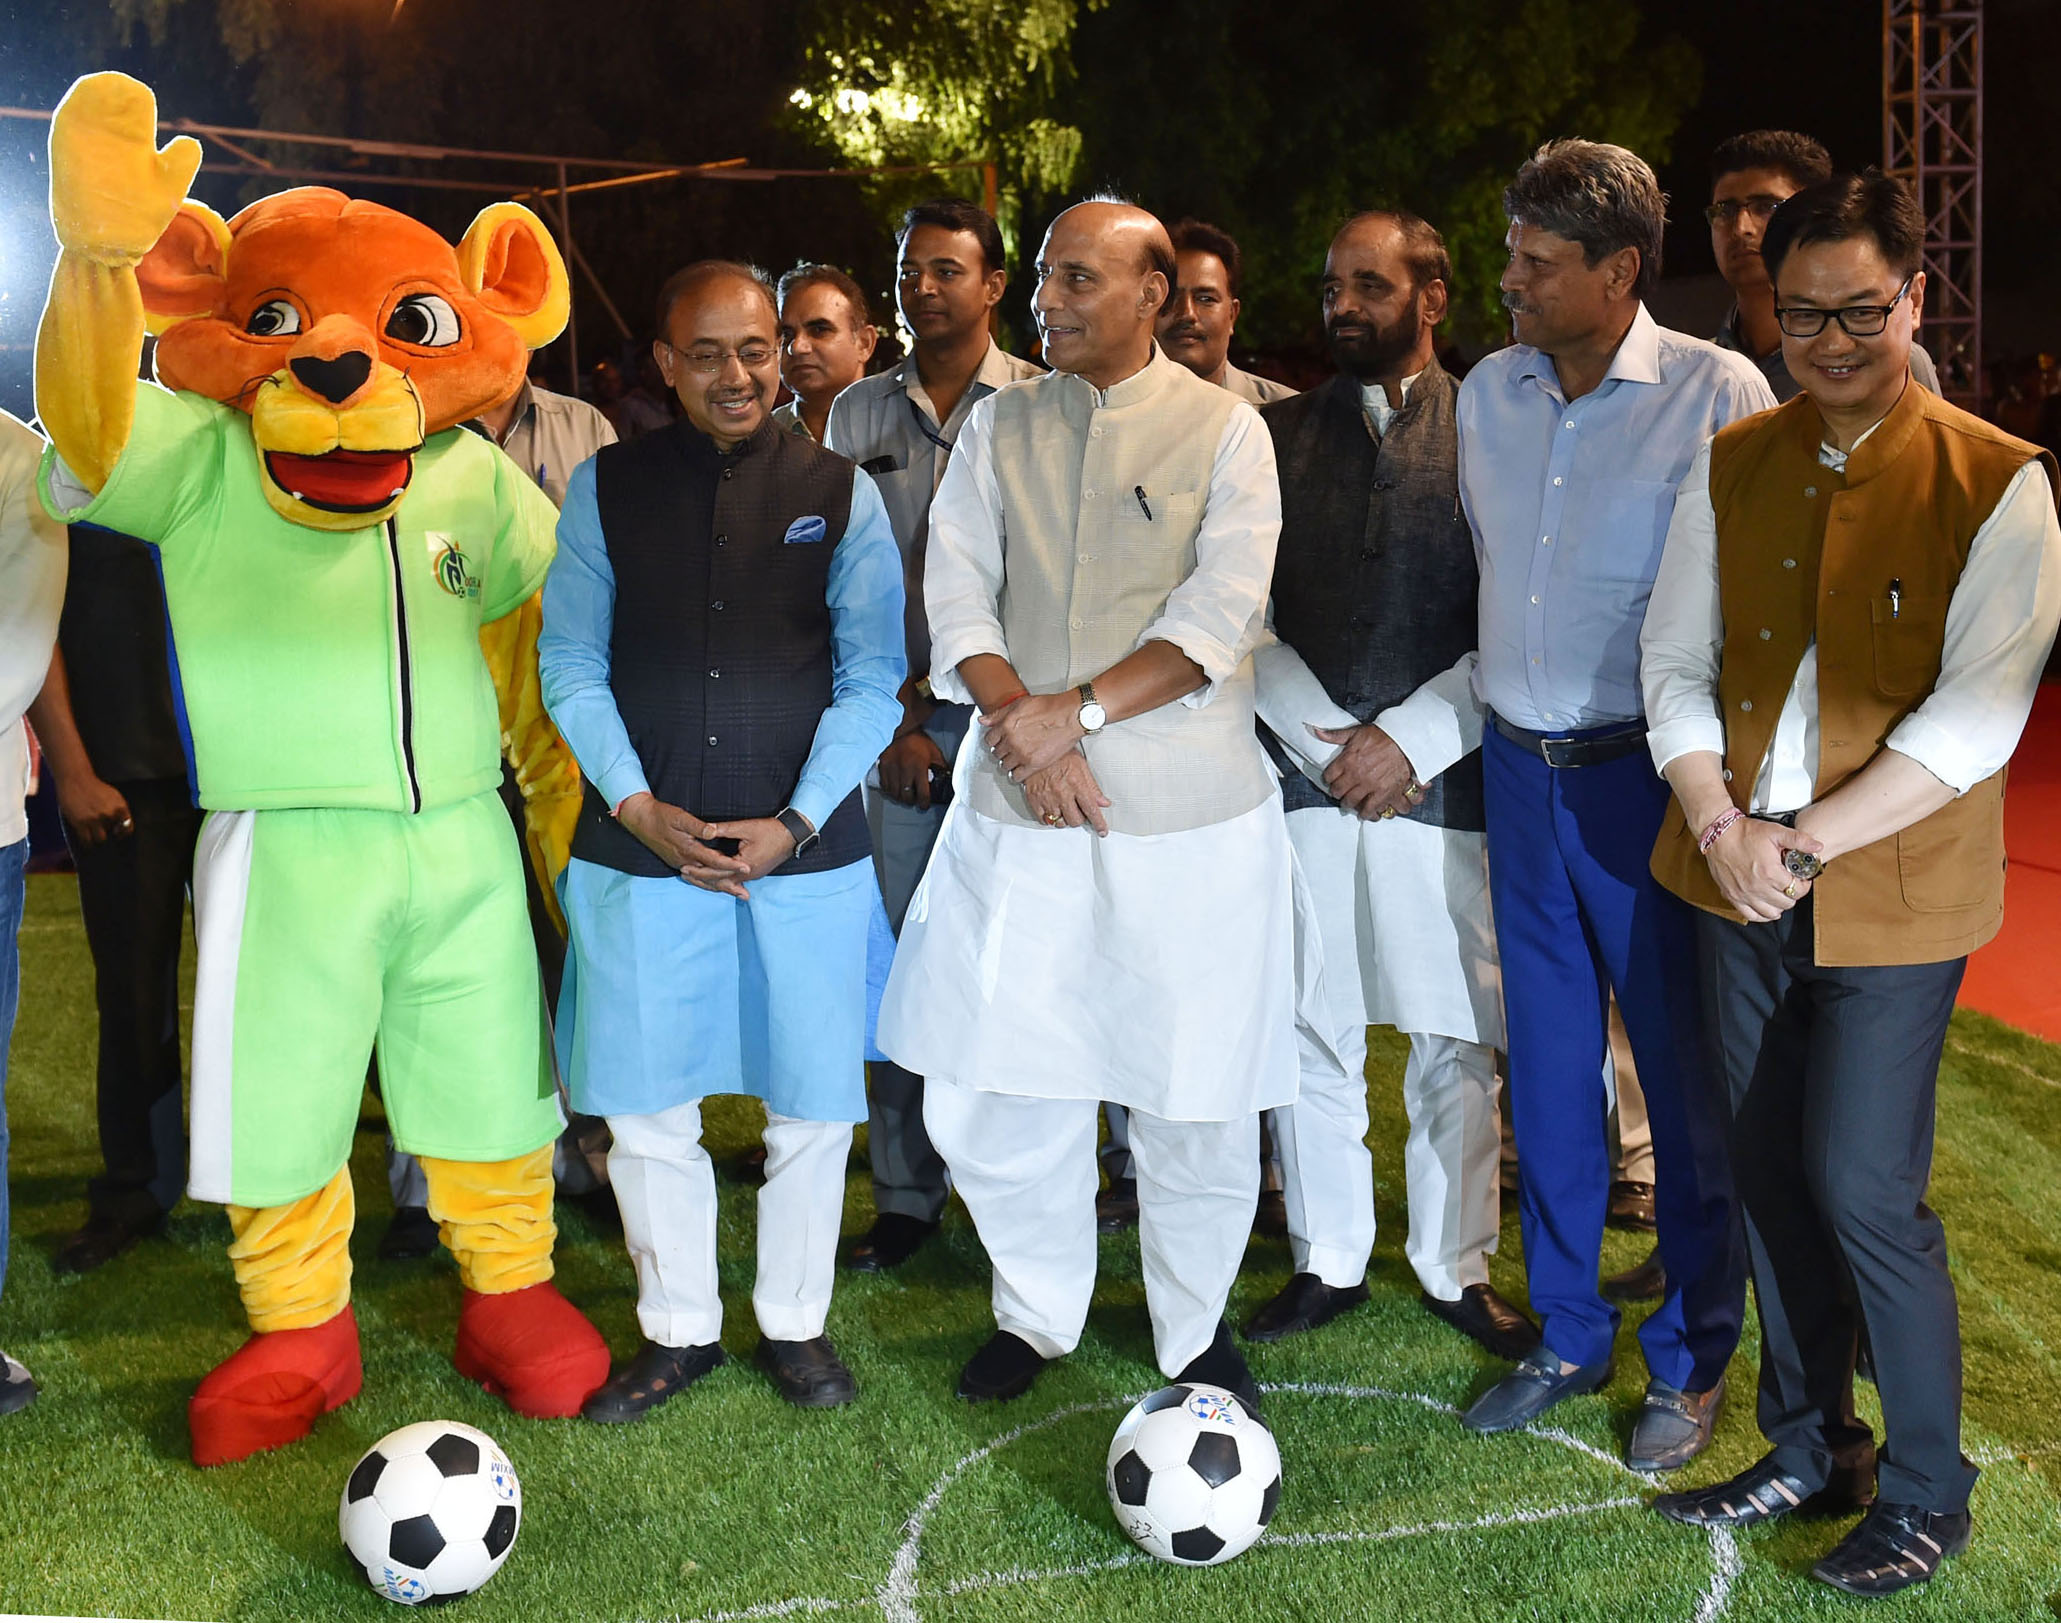 The Union Home Minister, Shri Rajnath Singh at the inauguration of the Curtain Raiser event 'Oorja', a U-19 Football Talent Hunt Tournament , organised by the Central Armed Police Forces and Central Police Organisation, in New Delhi on April 22, 2017.  The Minister of State for Youth Affairs and Sports (I/C), Water Resources, River Development and Ganga Rejuvenation, Shri Vijay Goel, the Minister of State for Home Affairs, Shri Hansraj Gangaram Ahir & Shri Kiren Rijiju and other dignitaries are also seen.